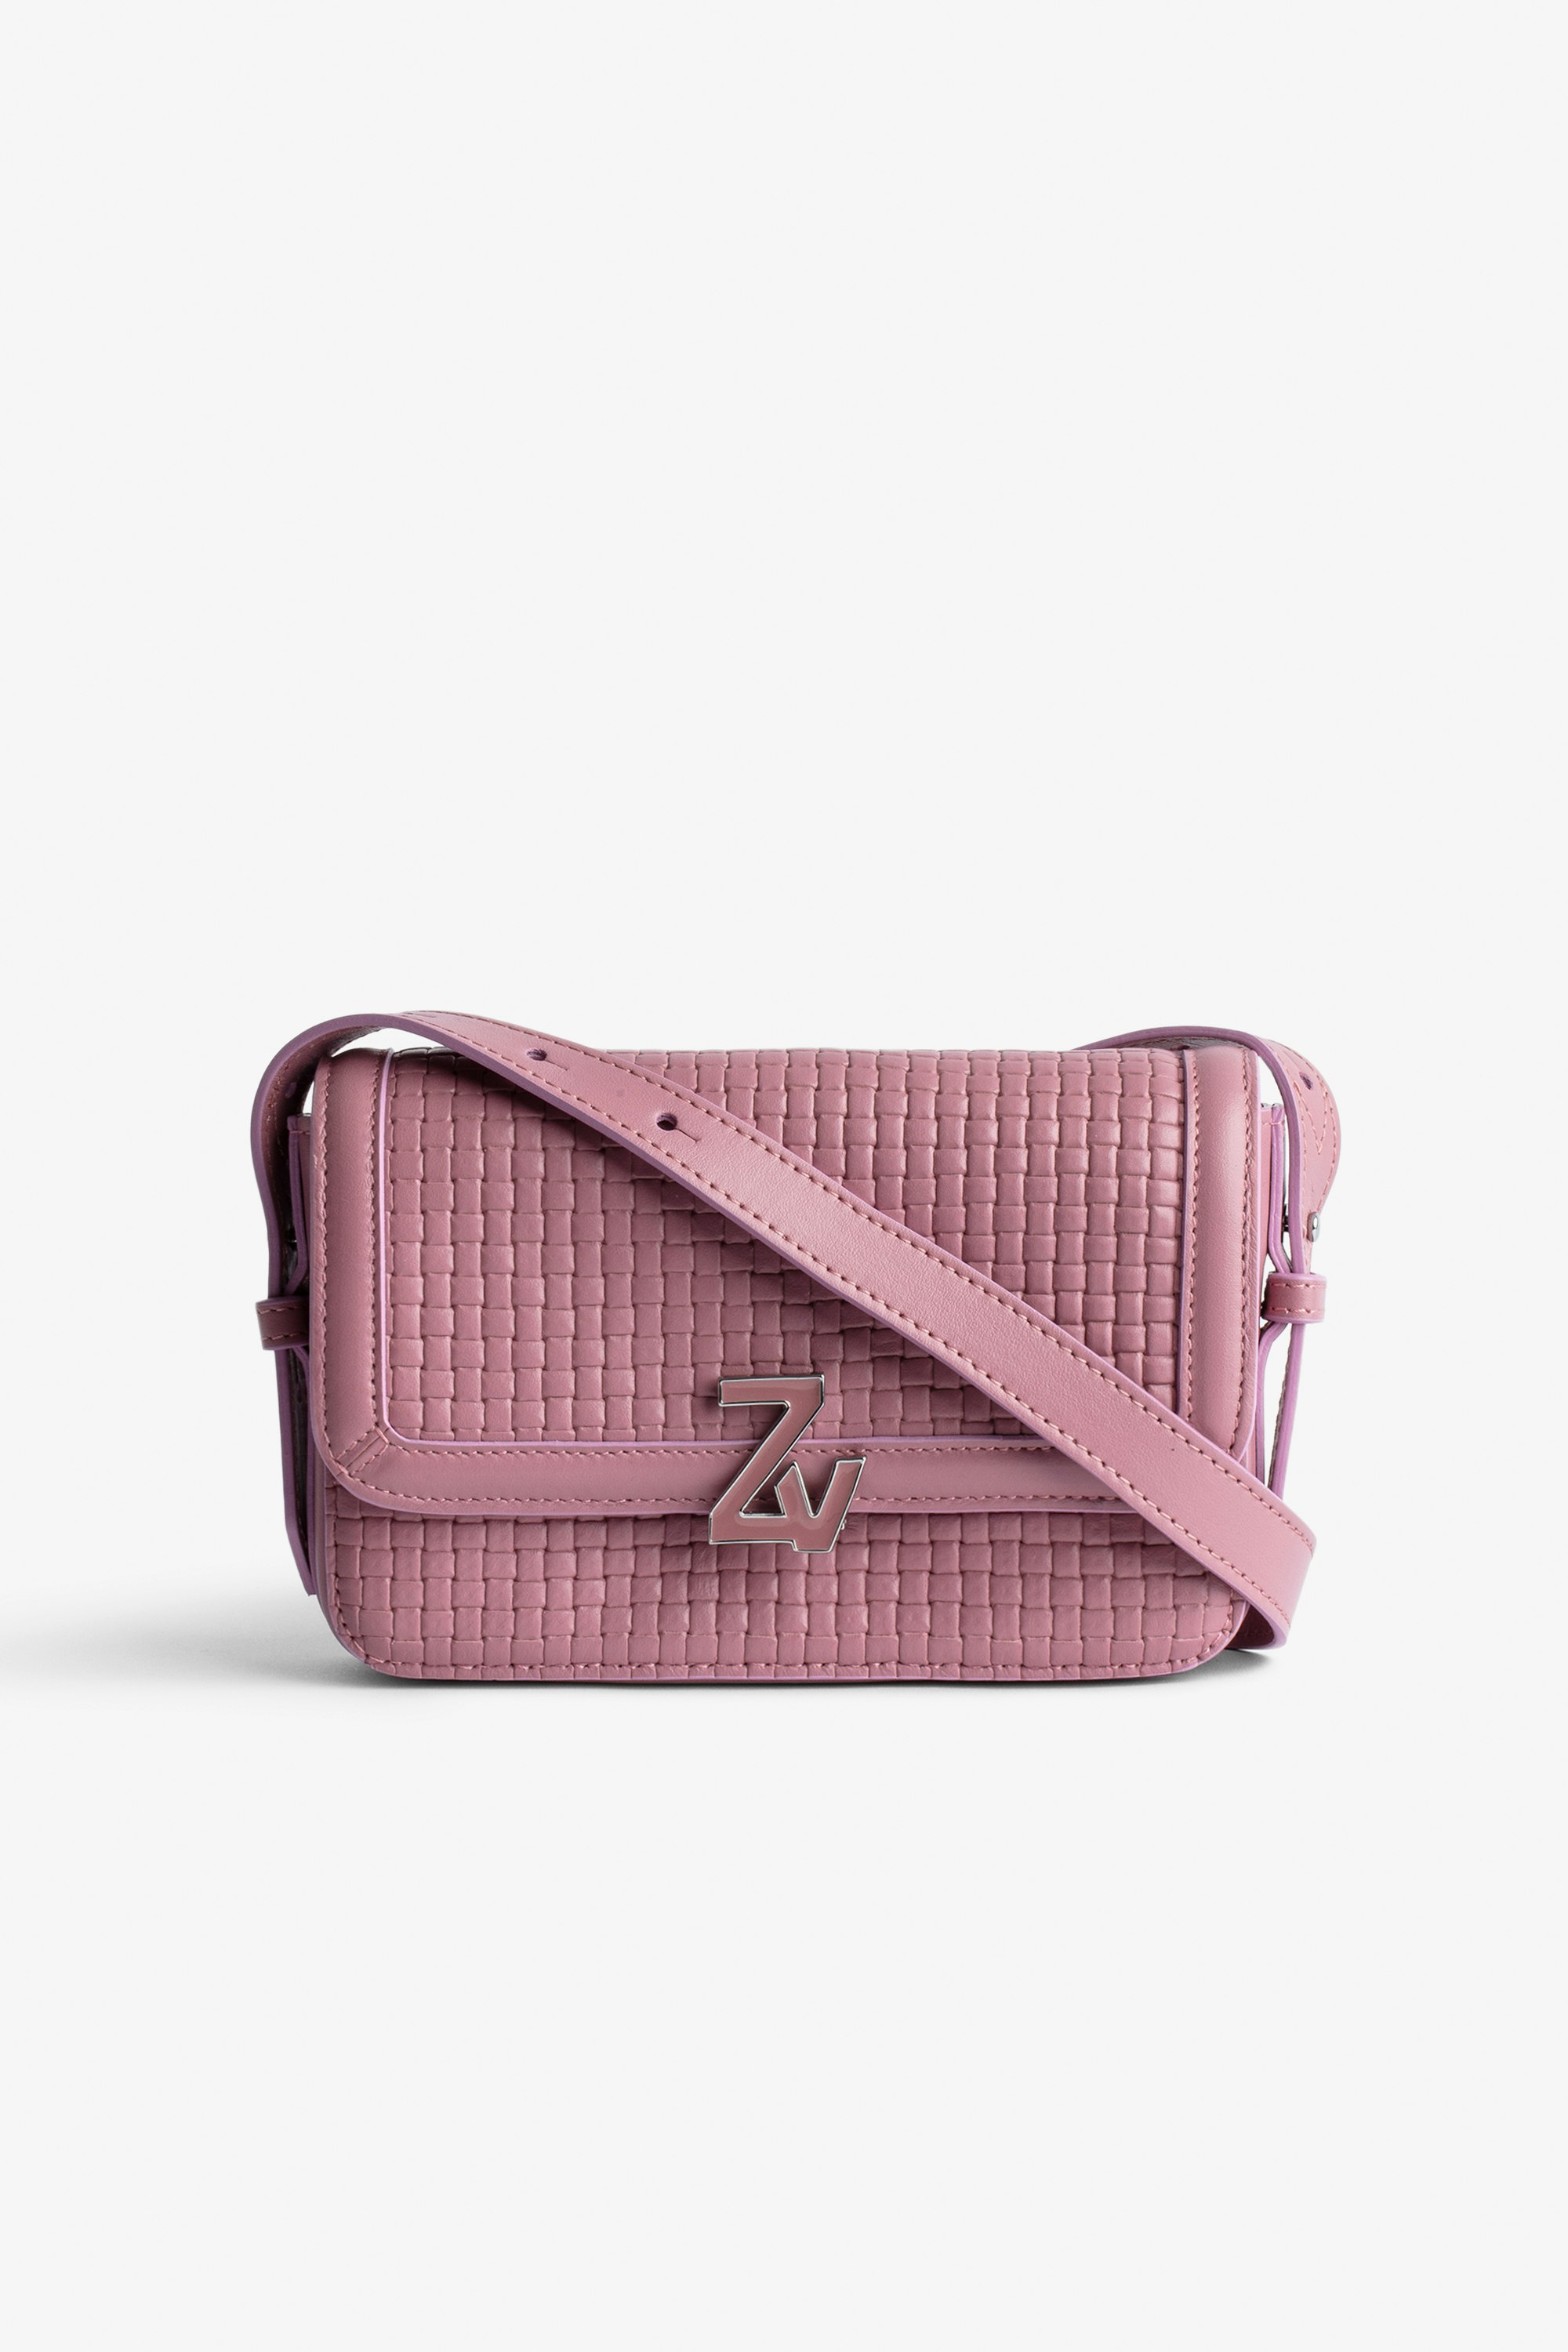 ZV Initiale Le Mini Bag  Women’s small bag pink latticework leather with a shoulder strap and ZV clasp